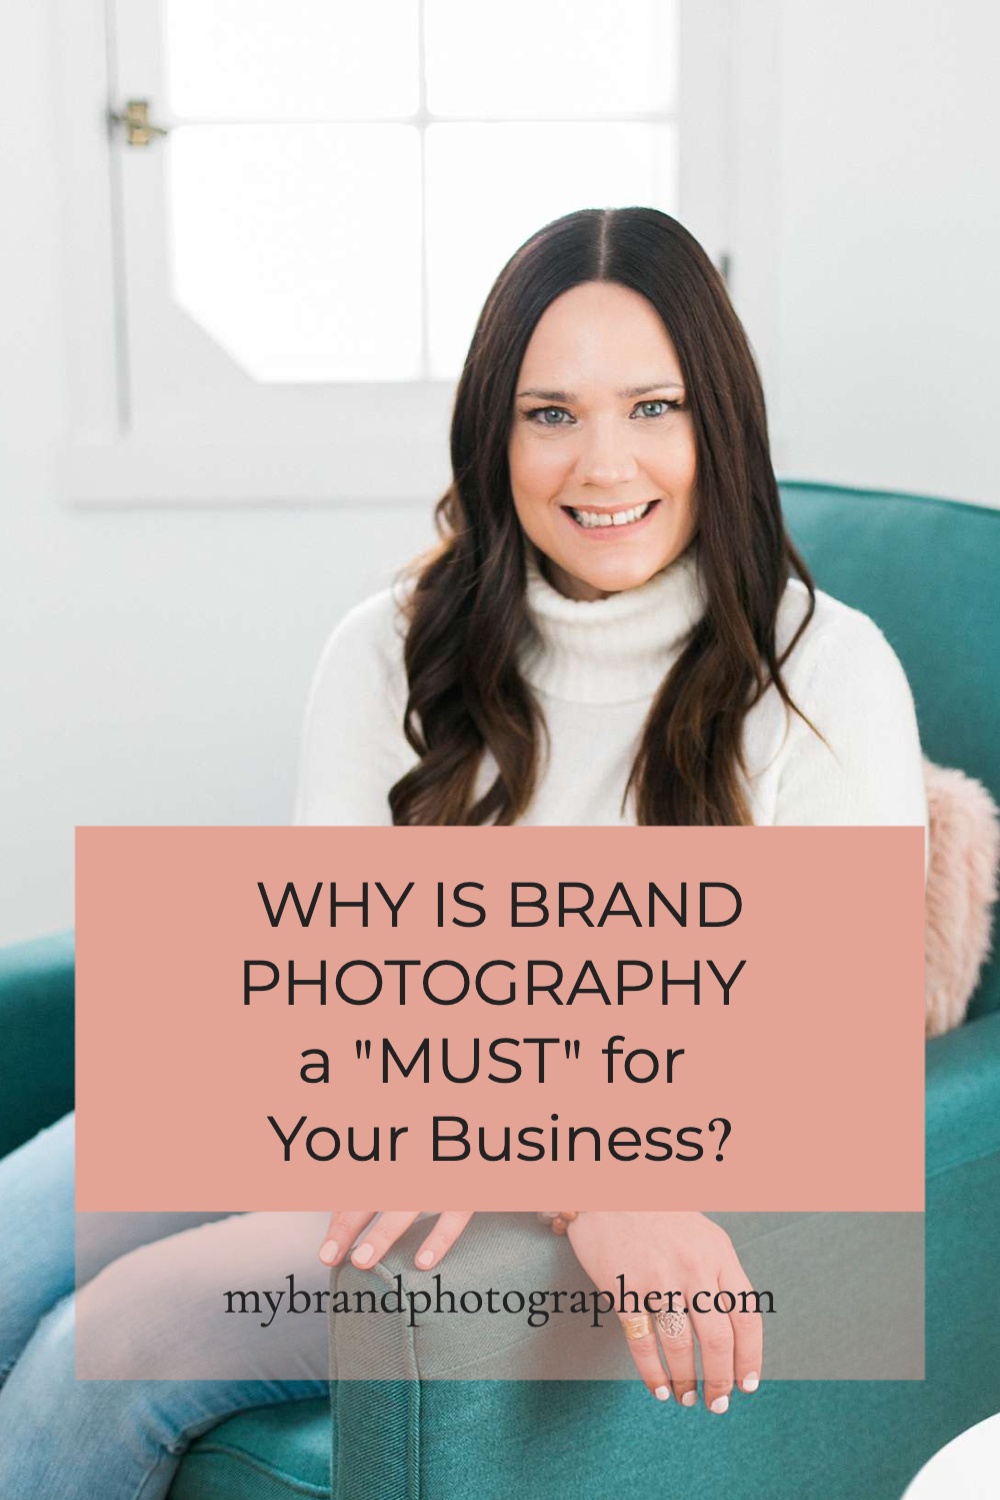 Why is Brand Photography a "MUST" for Your Business?